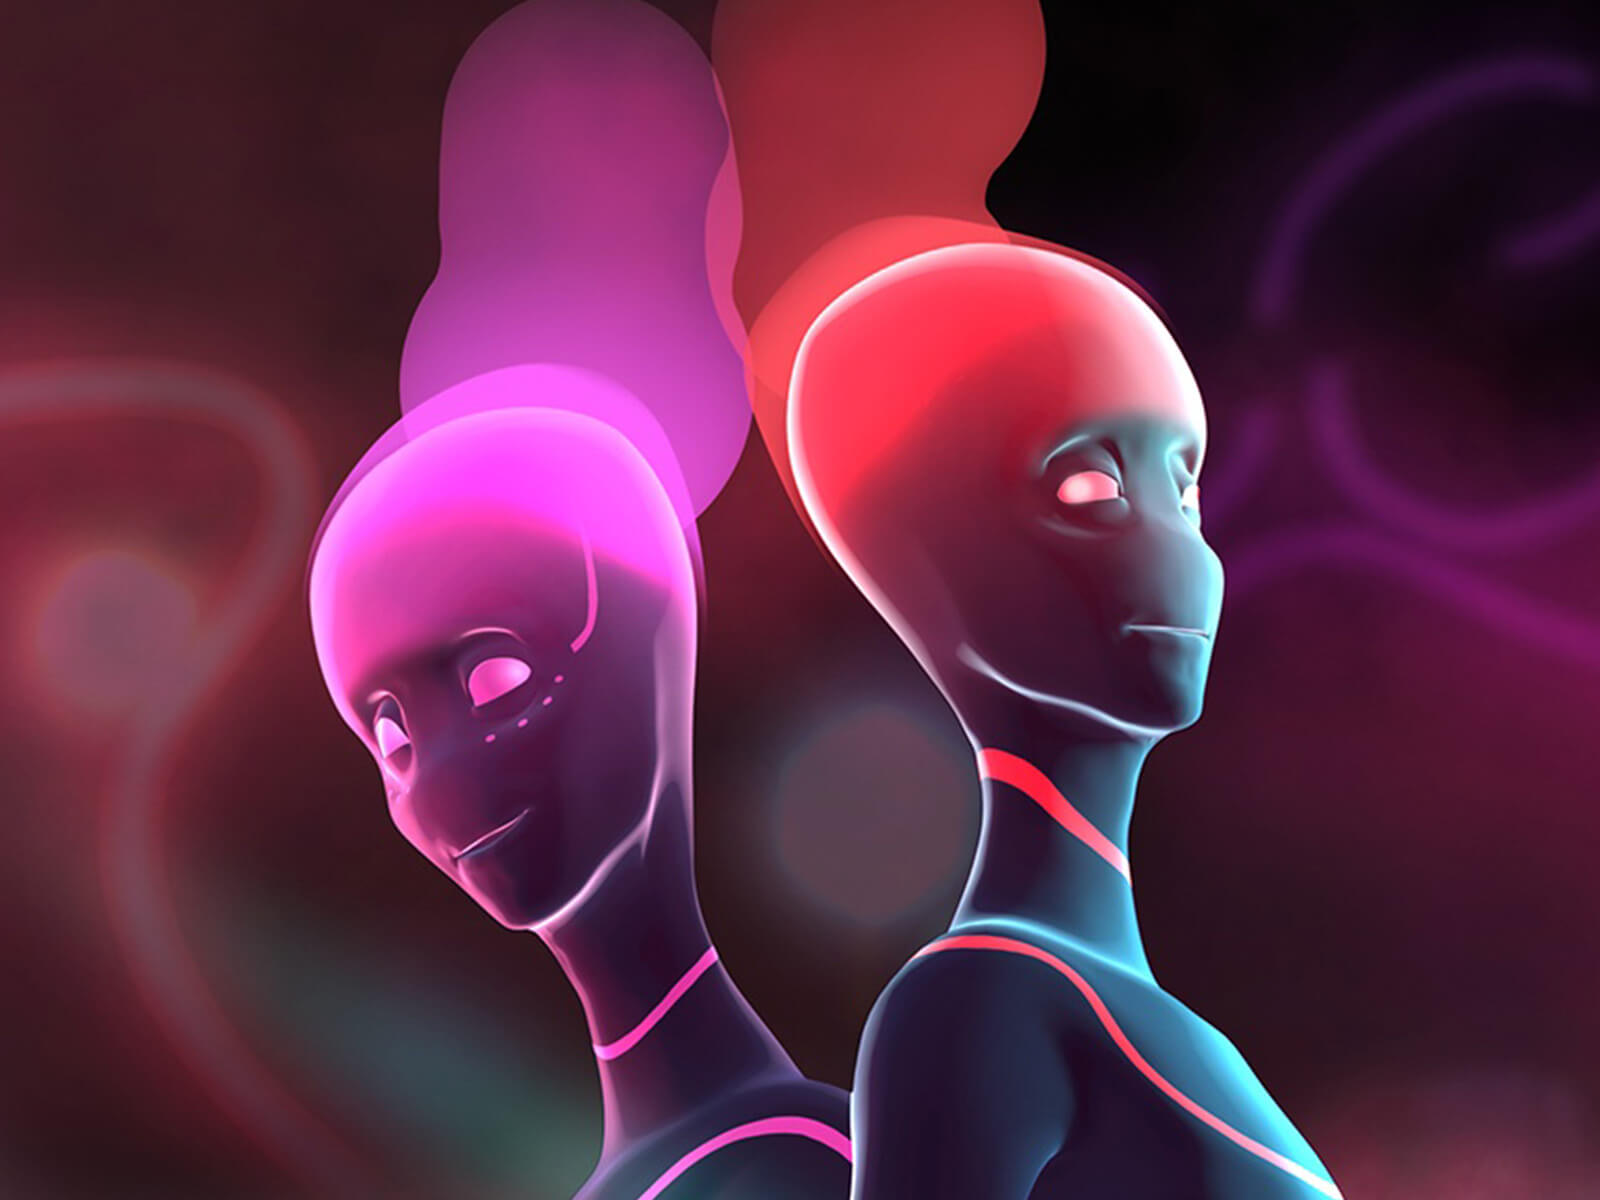 Concept painting of two humanoid characters, one with purple features and one with orange